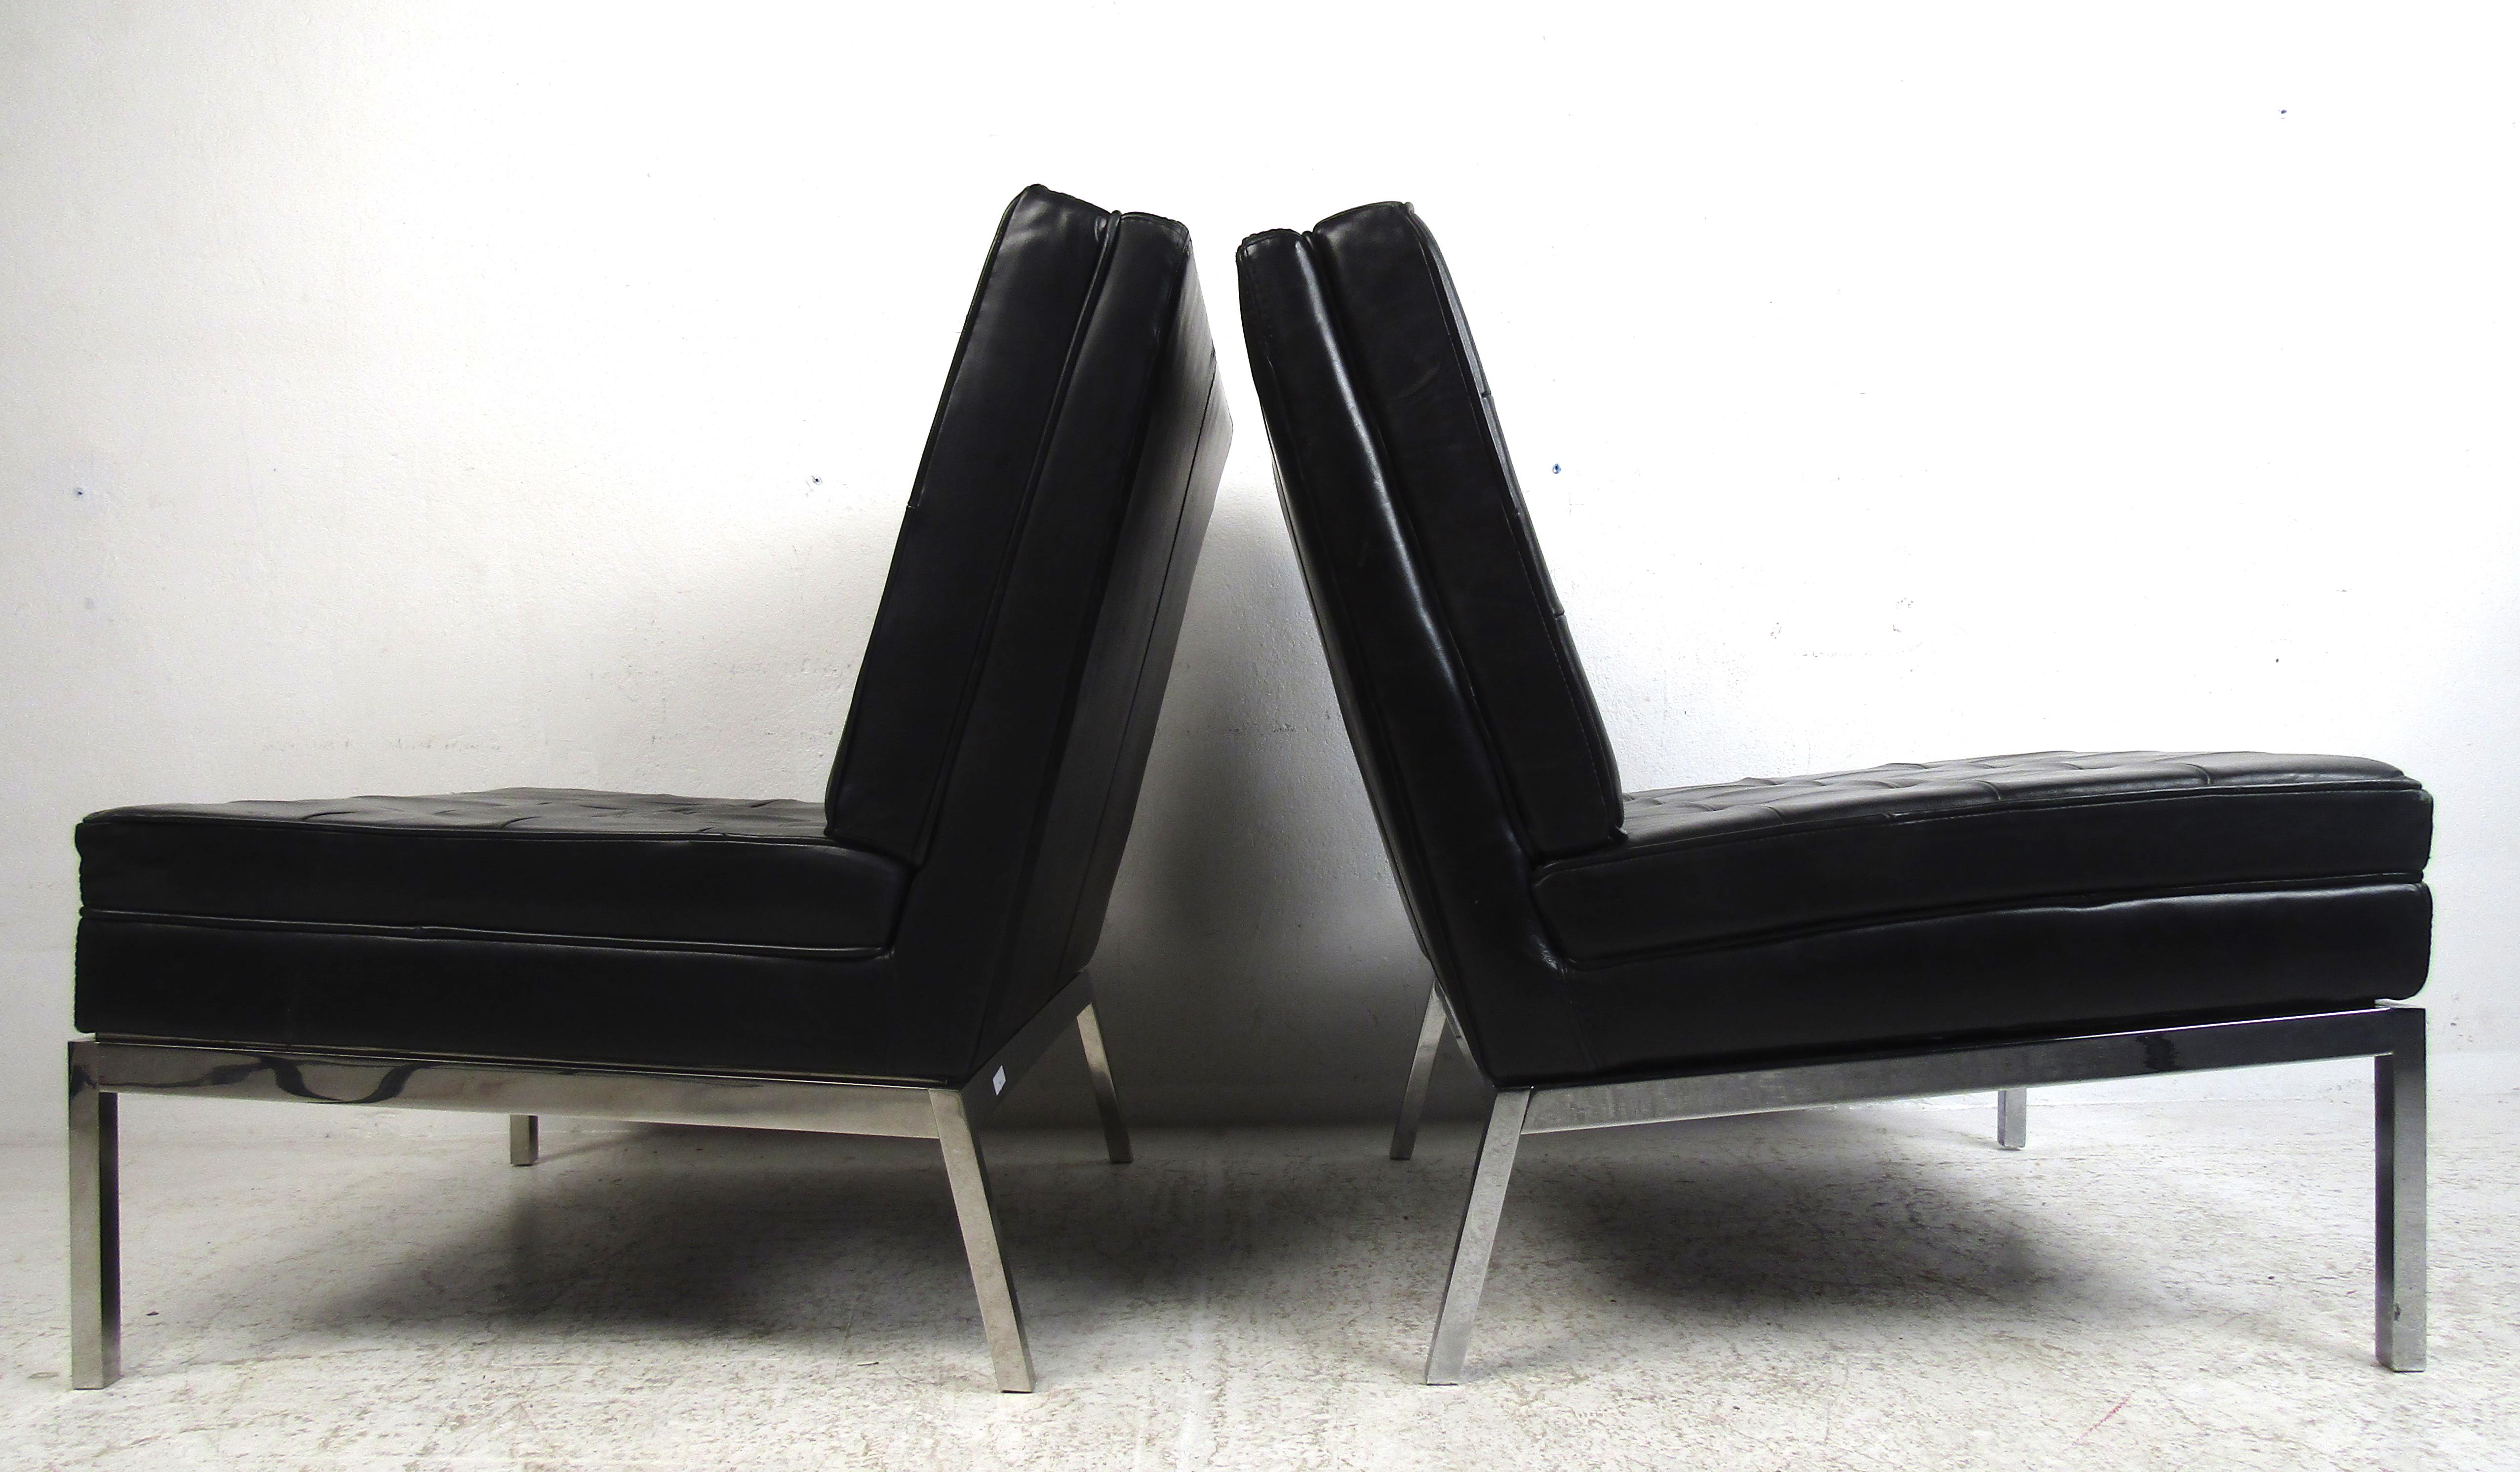 North American Pair of Mid-Century Modern Leather Slipper Lounge Chairs by Knoll